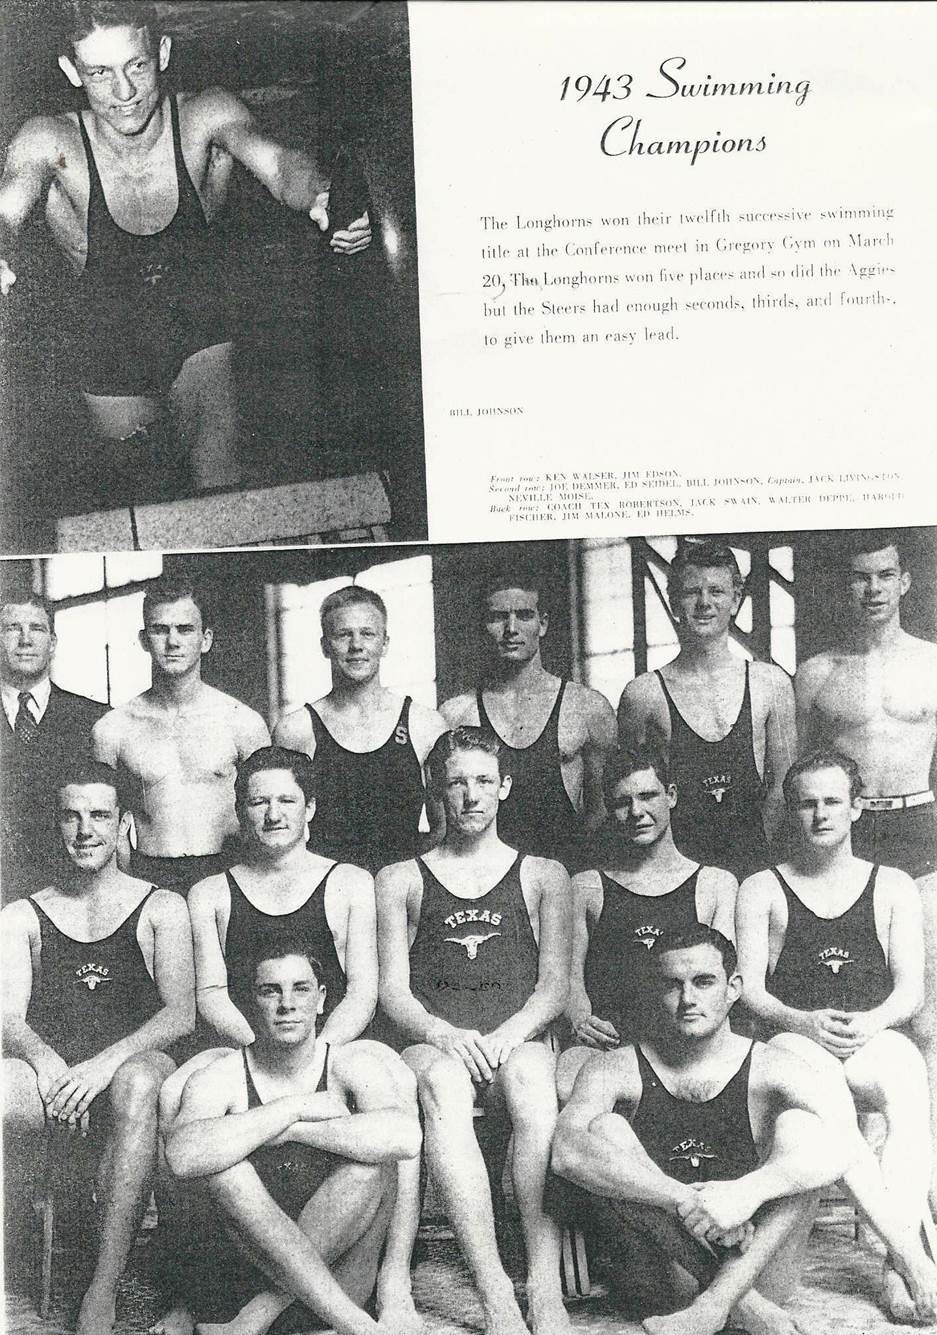  Bill Johnson in inset with 1943 team 